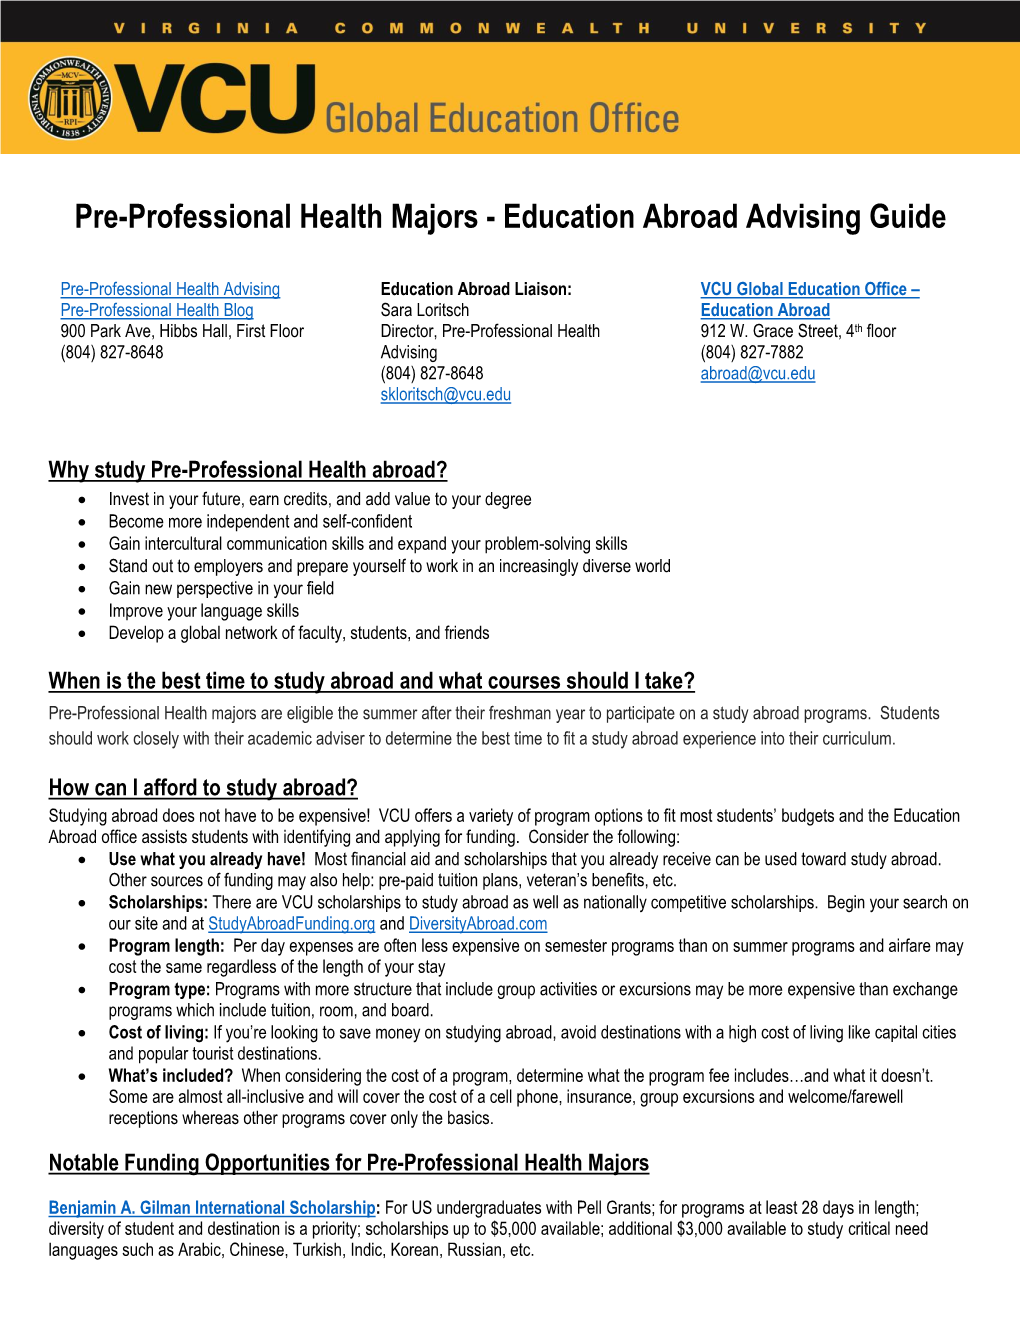 Education Abroad Advising Guide